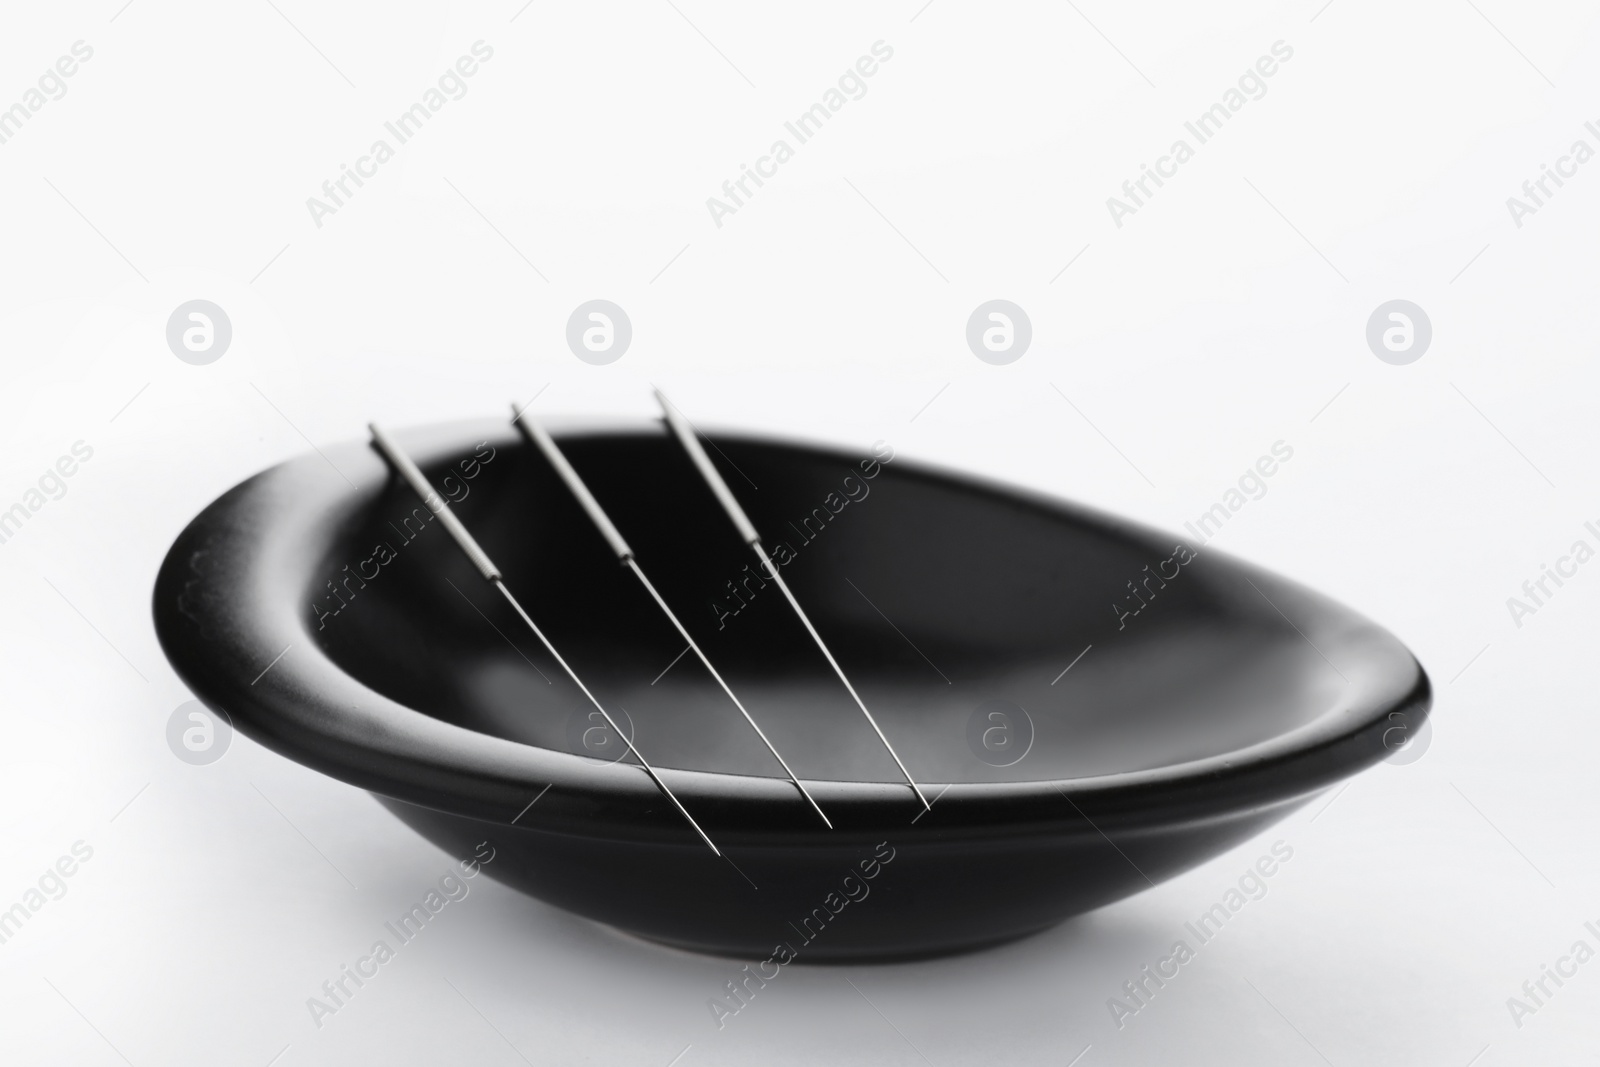 Photo of Bowl with needles for acupuncture on white background